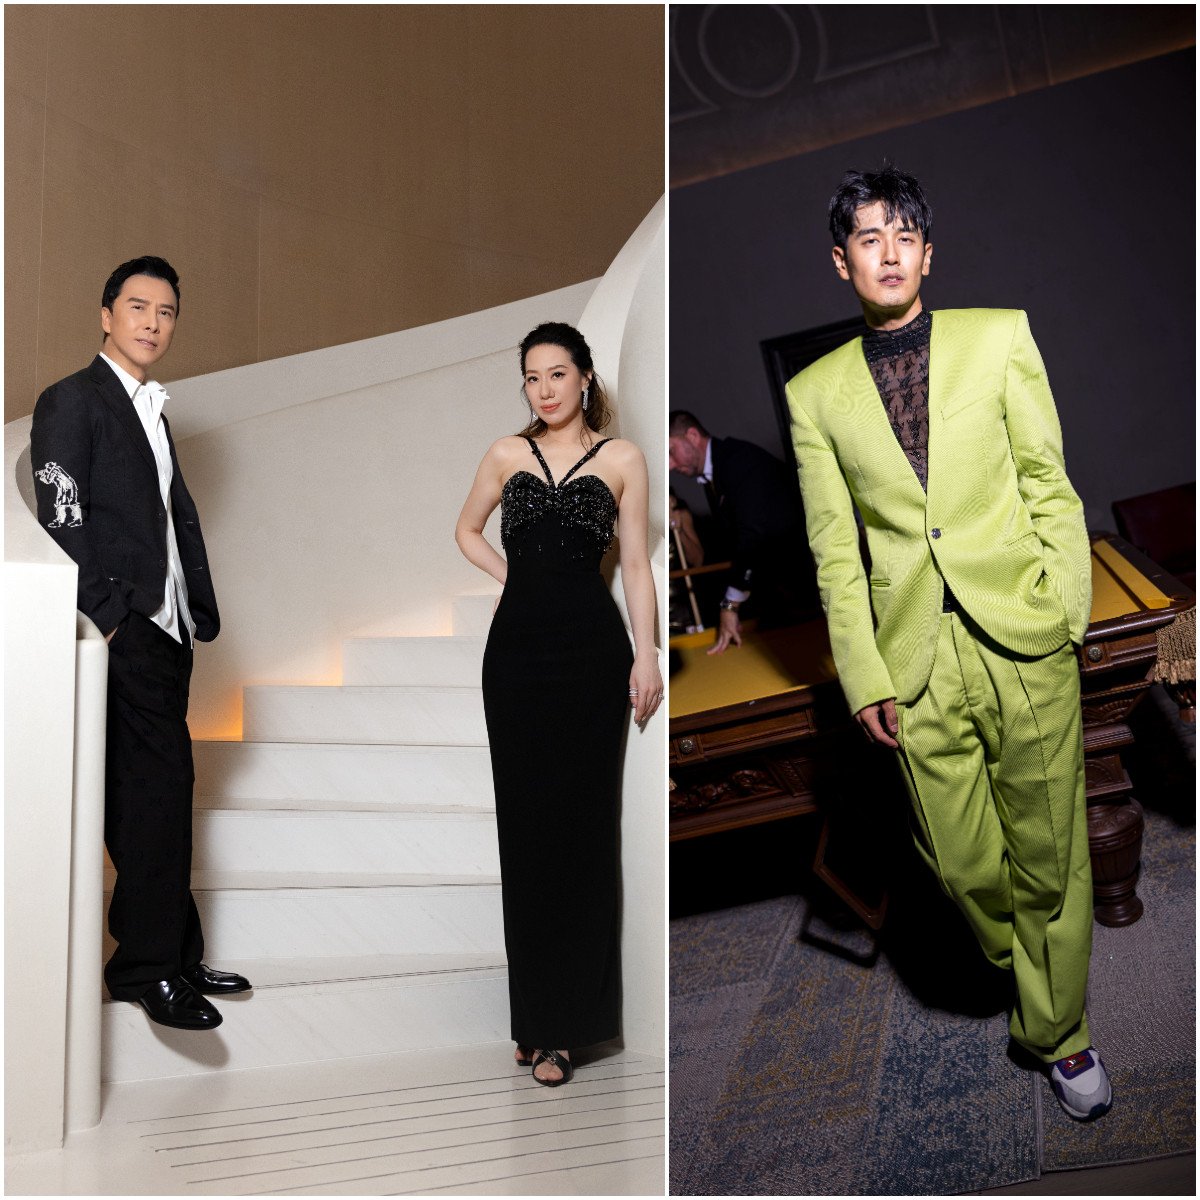 Donnie Yen and Cissy Wang attended The Singapore Edition’s official launch party, where Singaporean singer Nathan Hartono performed. Photos: Handout